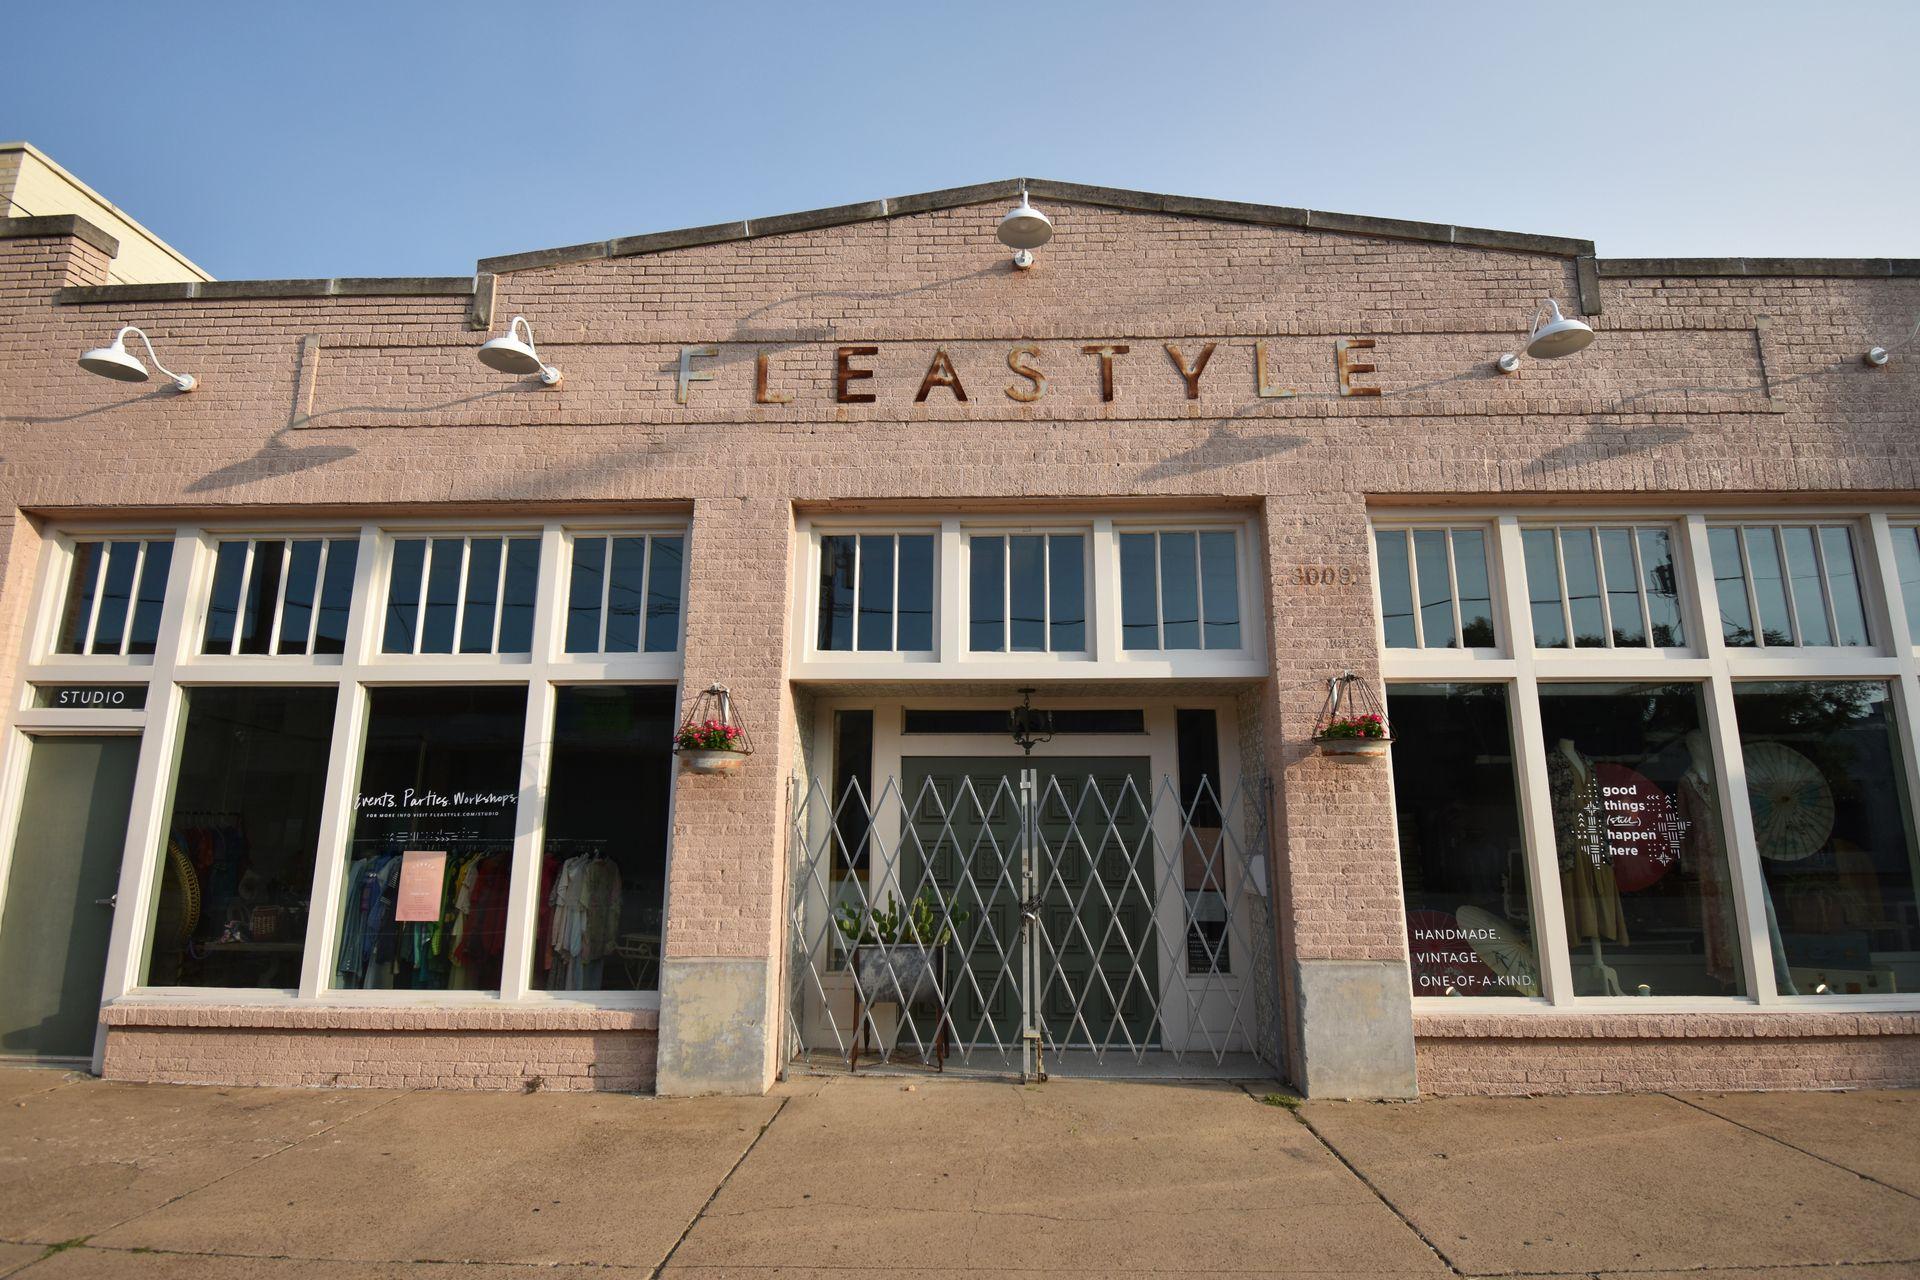 The exterior of Flea Style. The building is made of brick and the Flea Style letters have a vintage-feel.